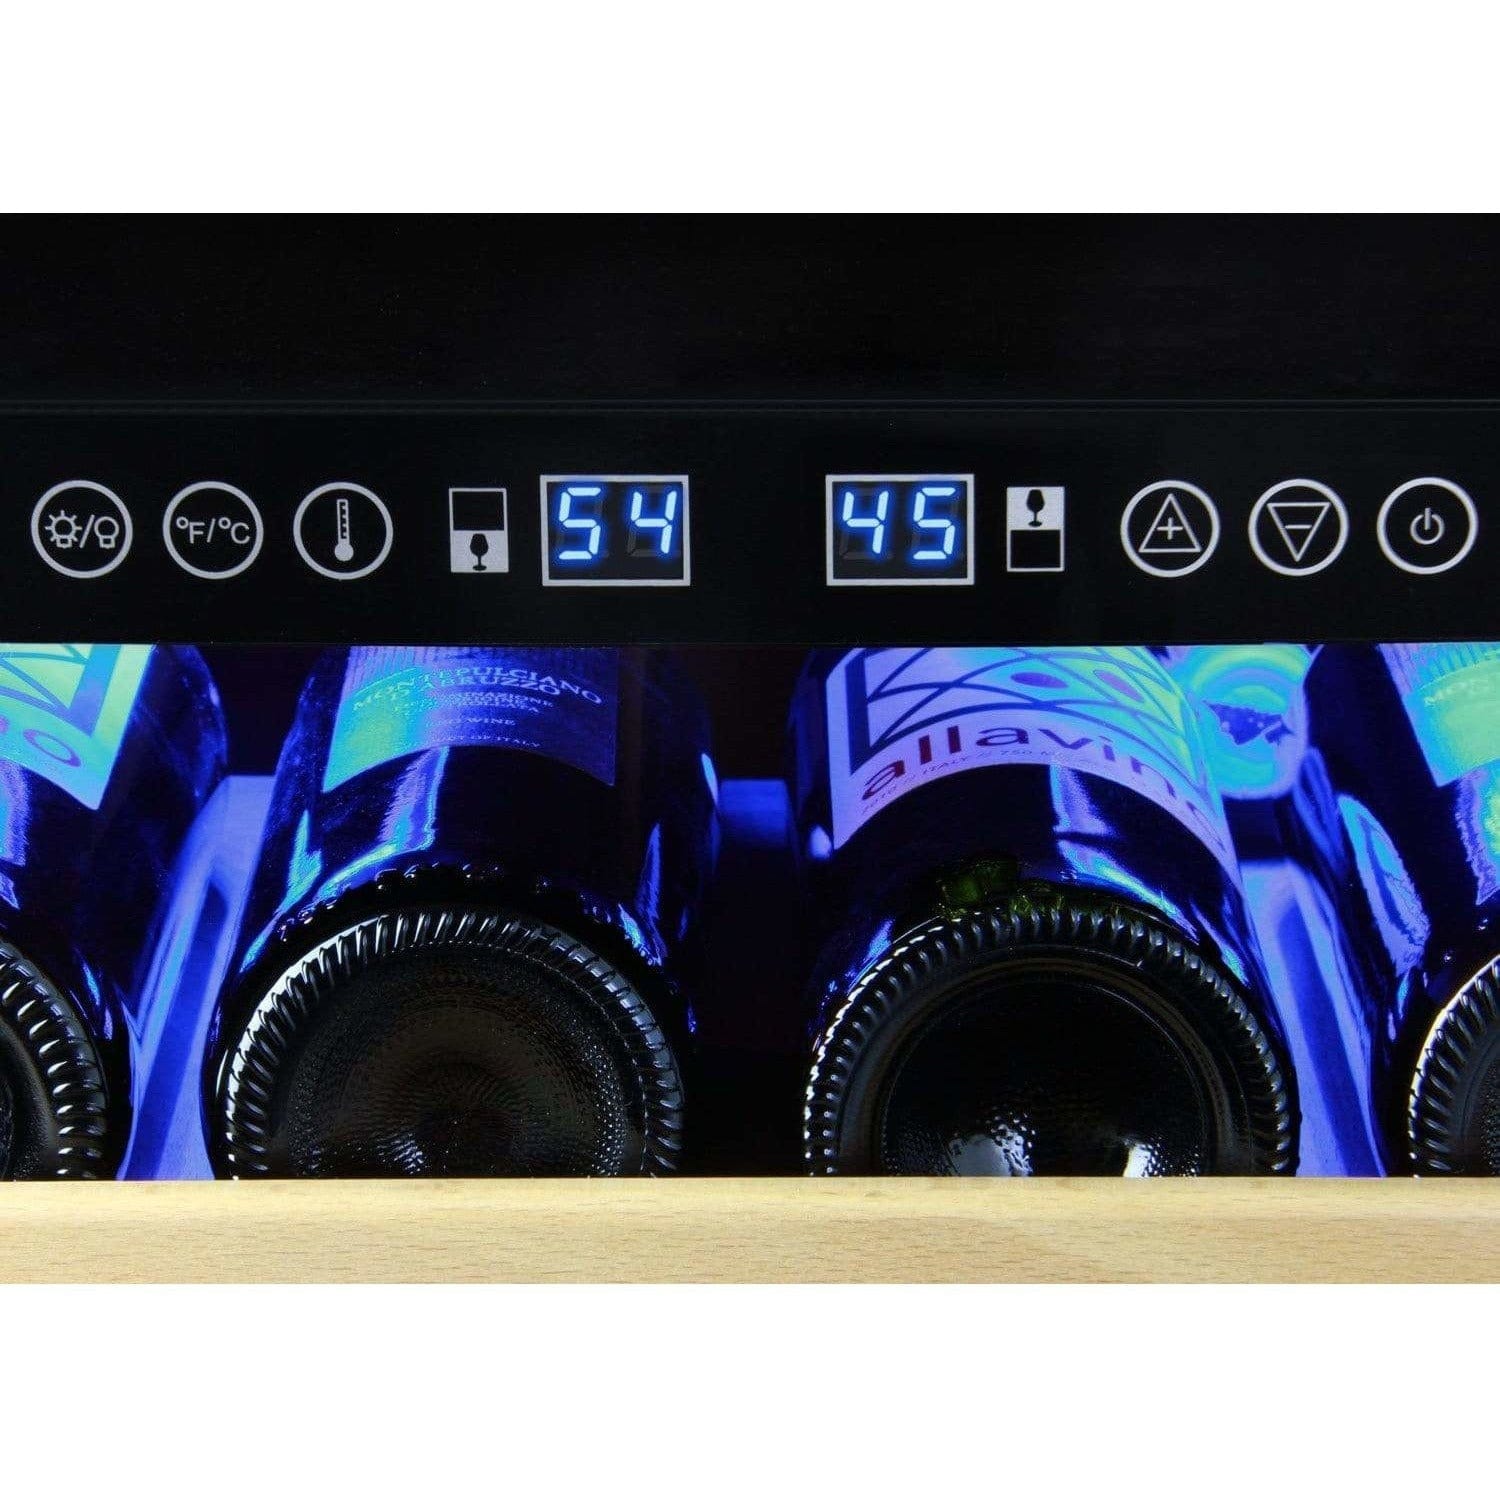 Allavino FlexCount 172 Bottle Dual Zone Stainless Steel Right Hinge Wine Fridge YHWR172-2SWRN Wine Coolers Empire